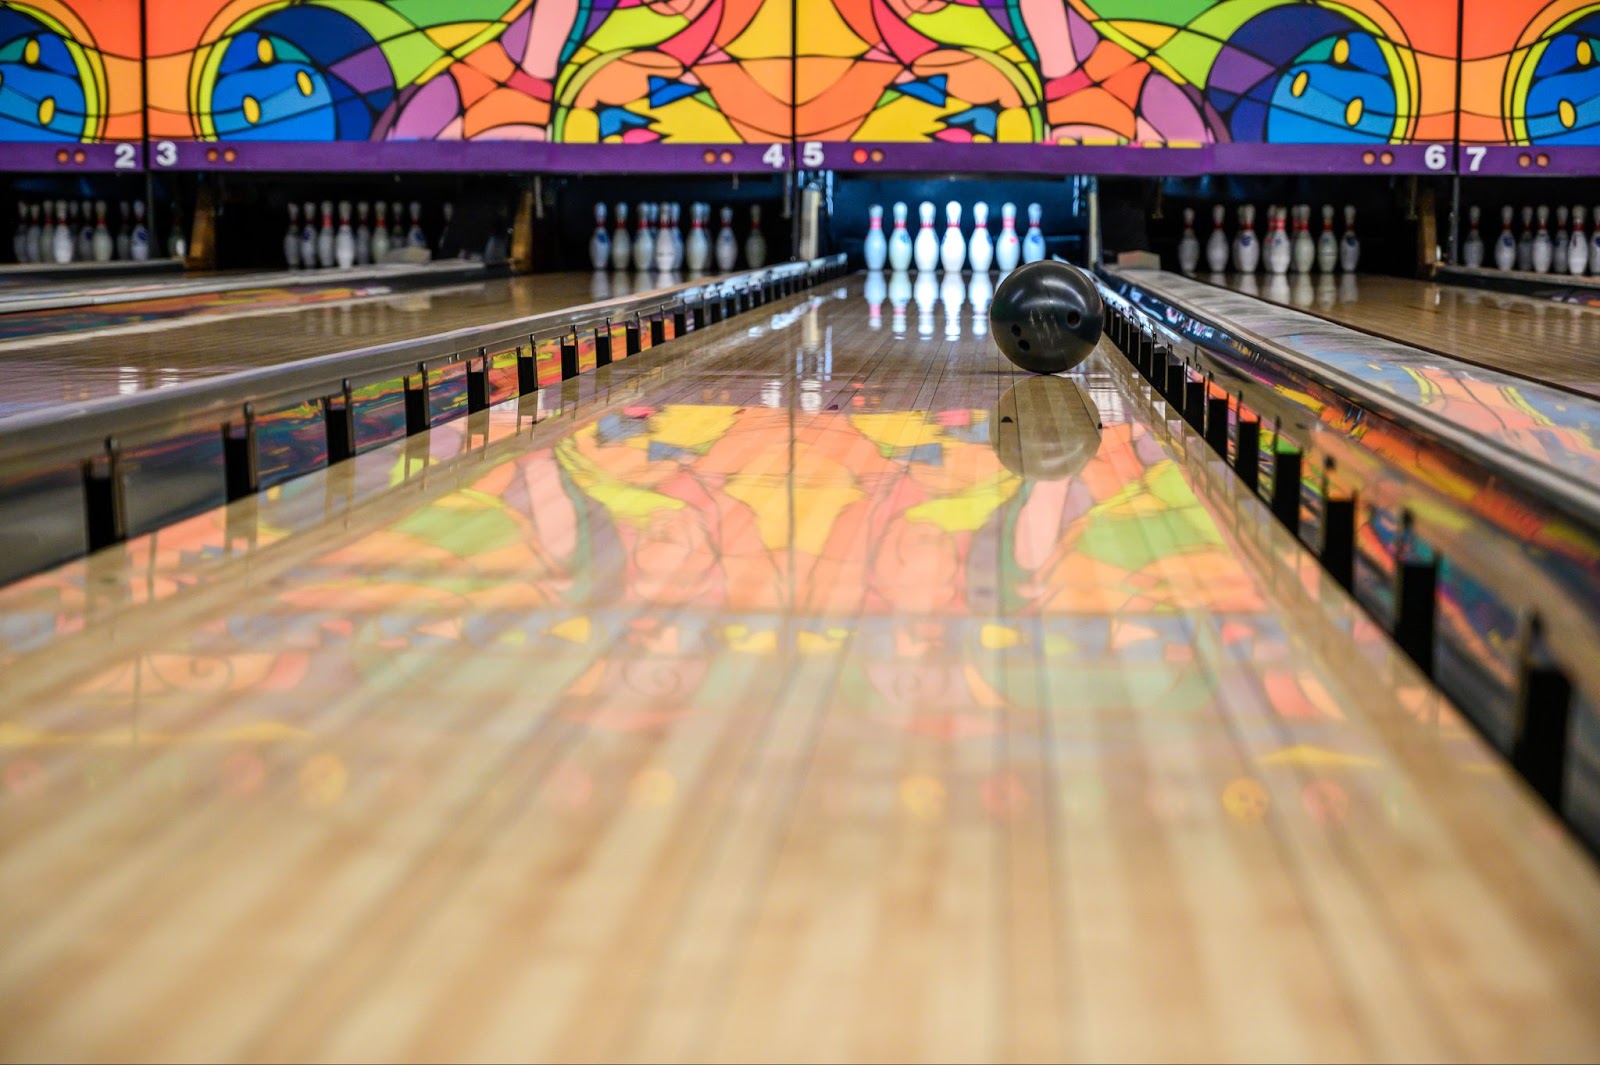 A bowling ball on a bowling lane, set for an epic night out of bowling and laser tag at a laser tag arena